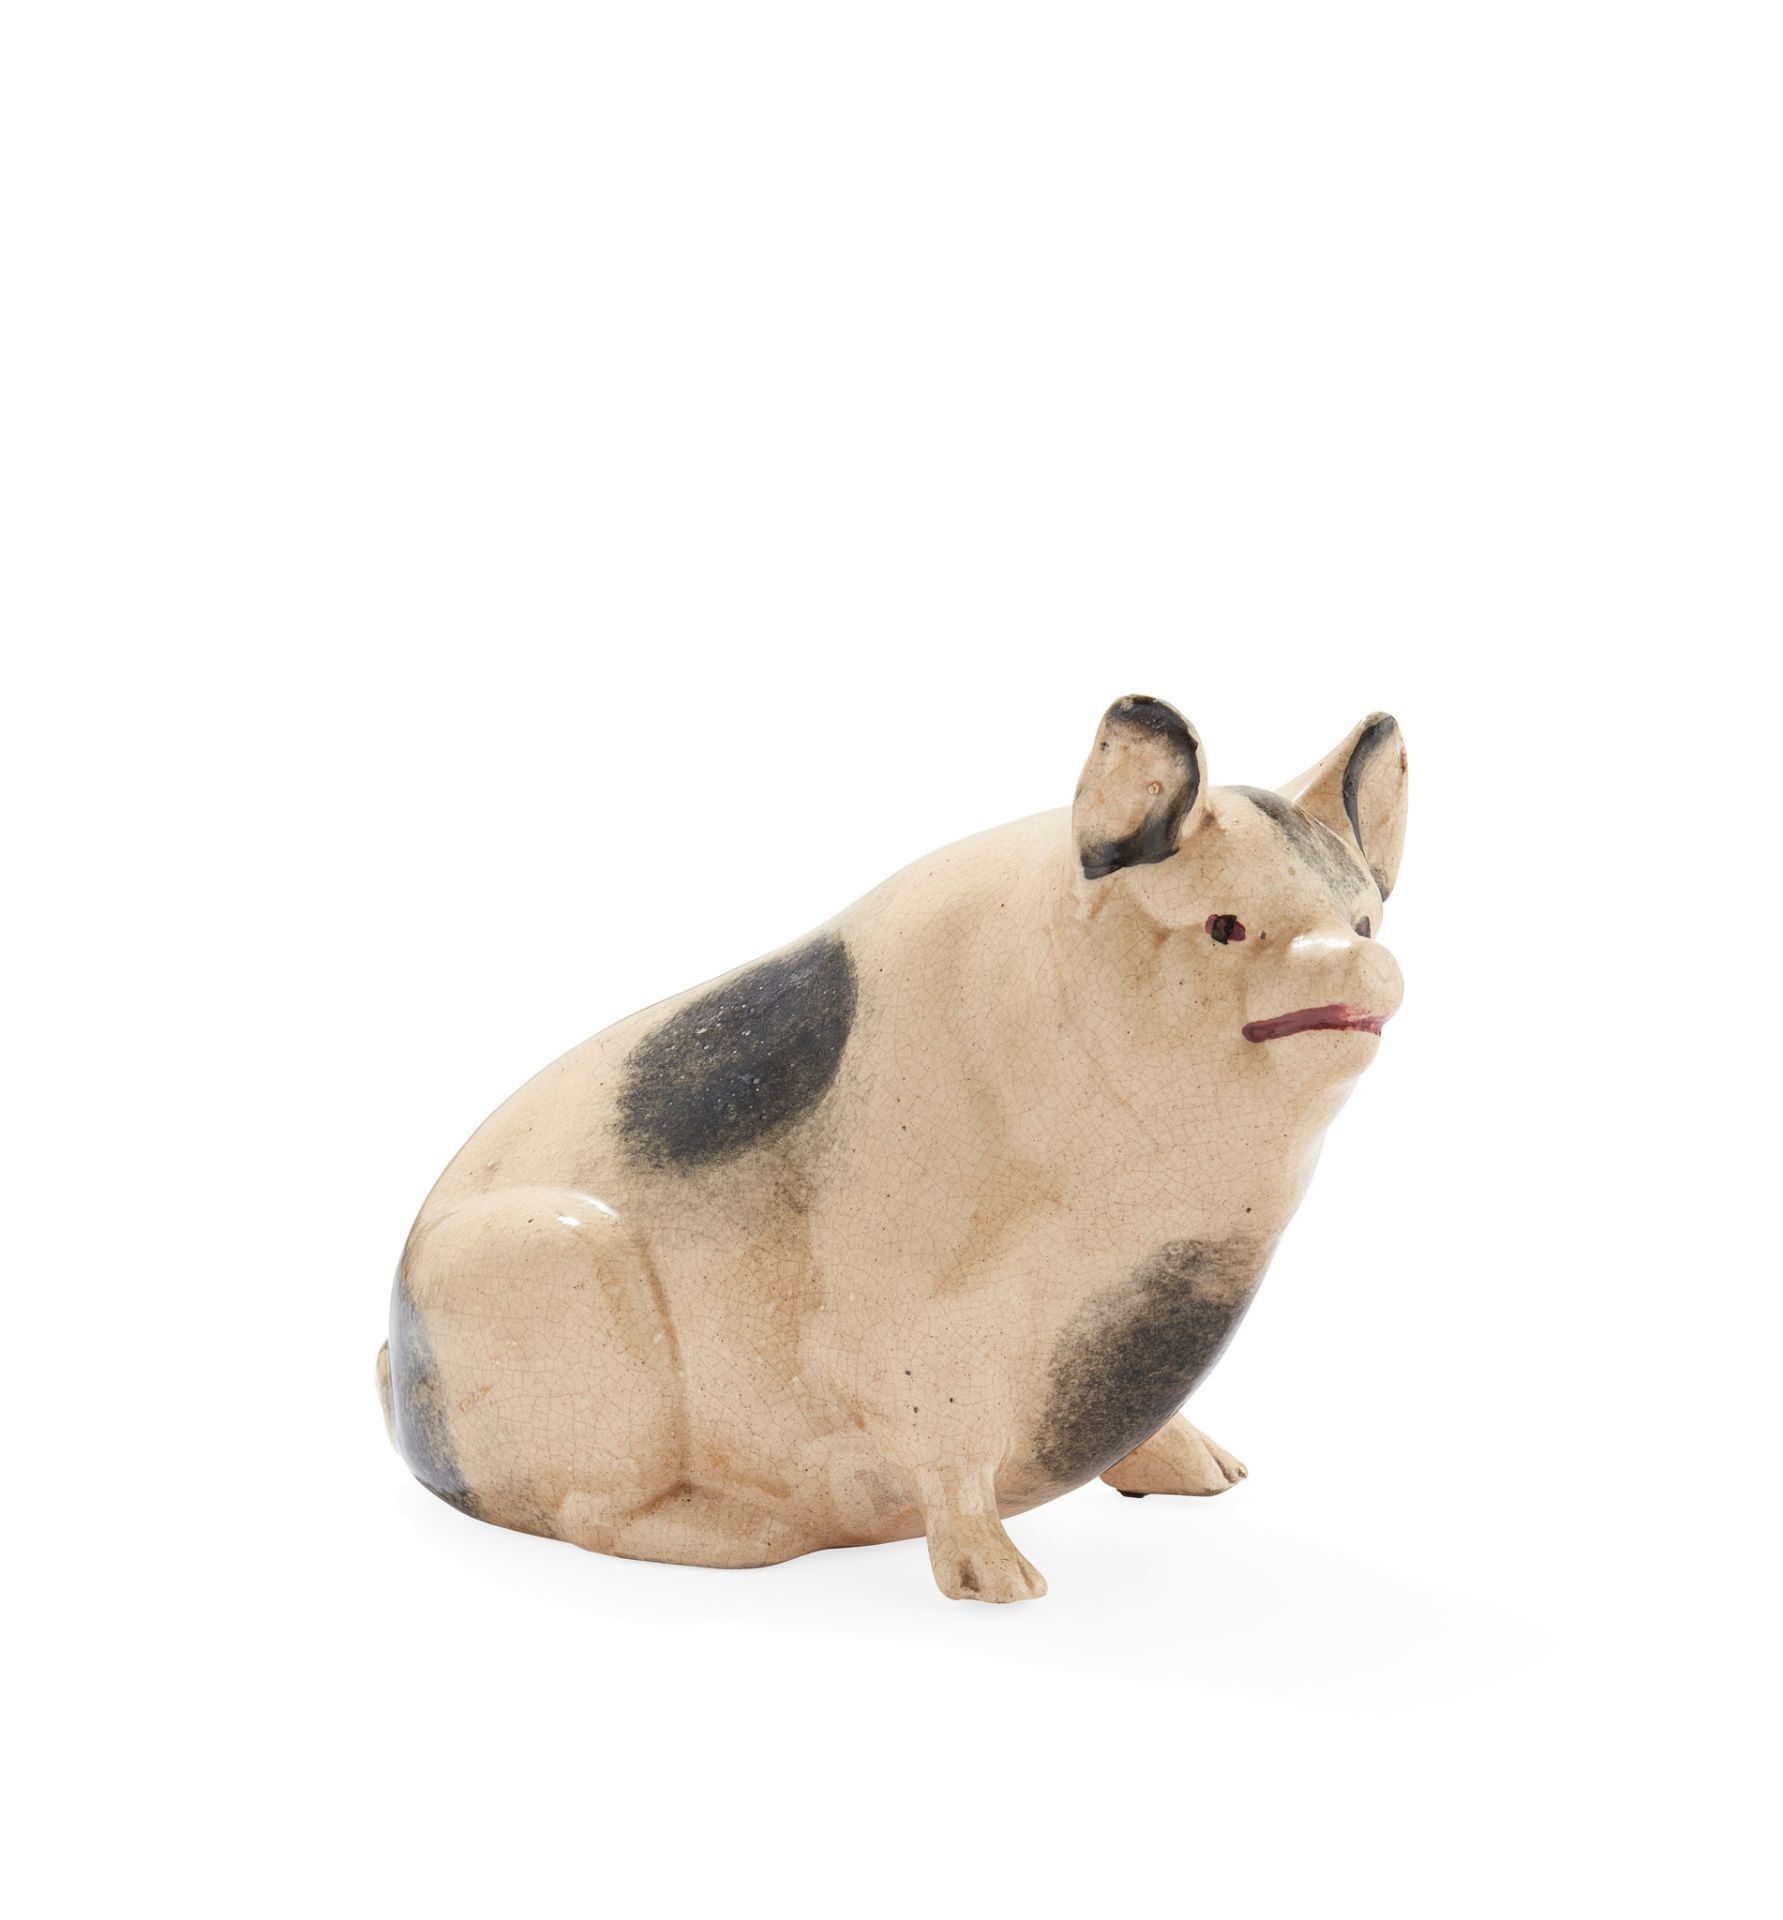 A SCOTTISH POTTERY MONEY BANK PIG EARLY 20TH CENTURY